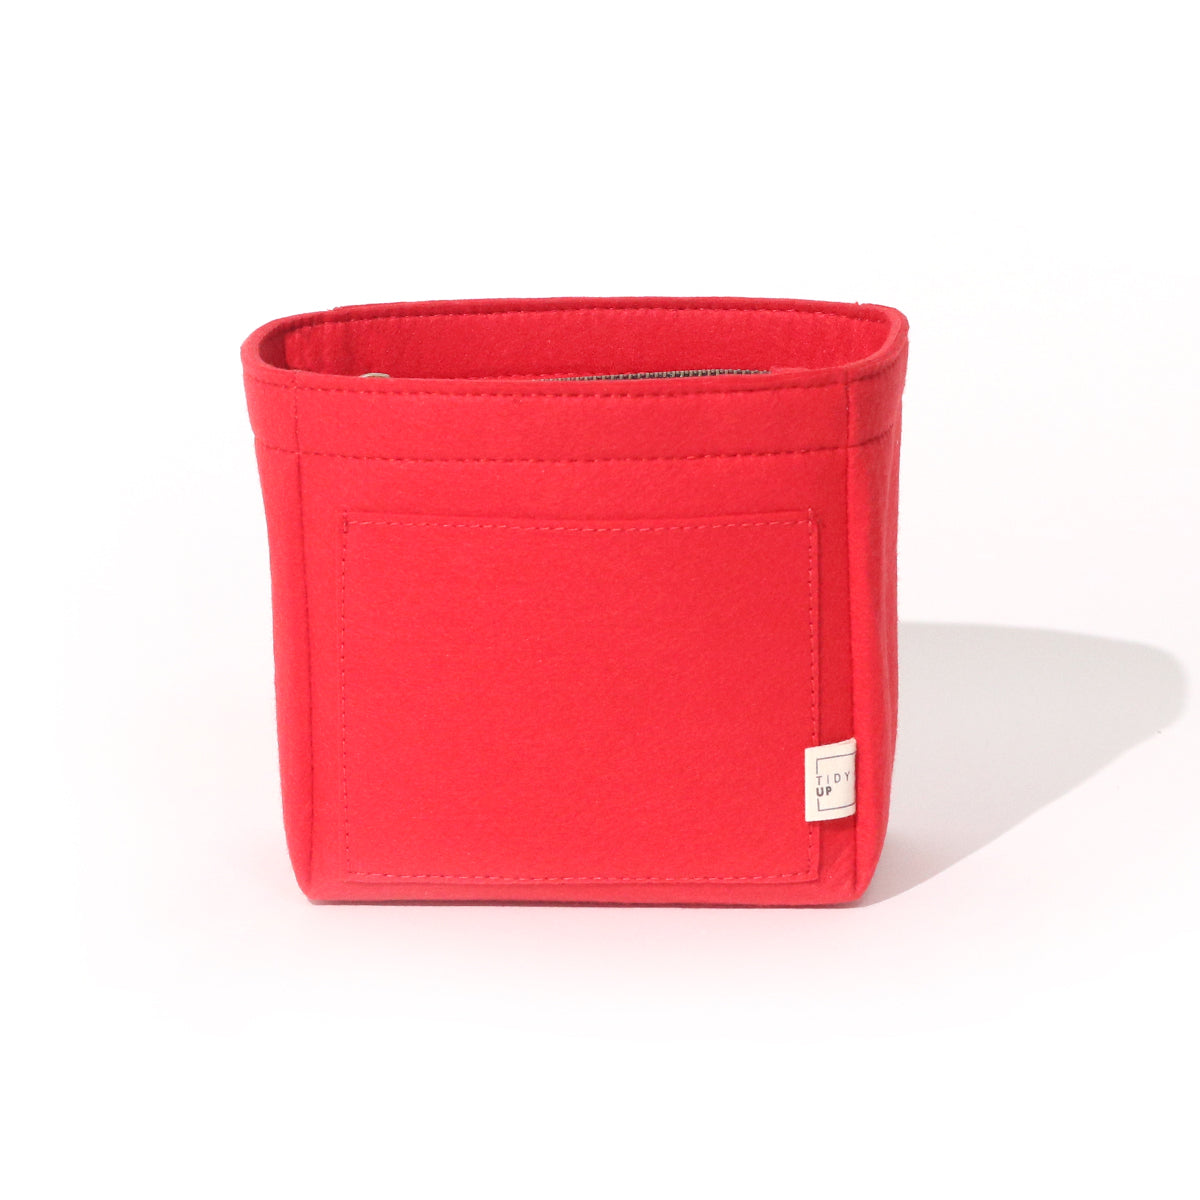 TidyUp Cael Compact Red Bag Organiser Front